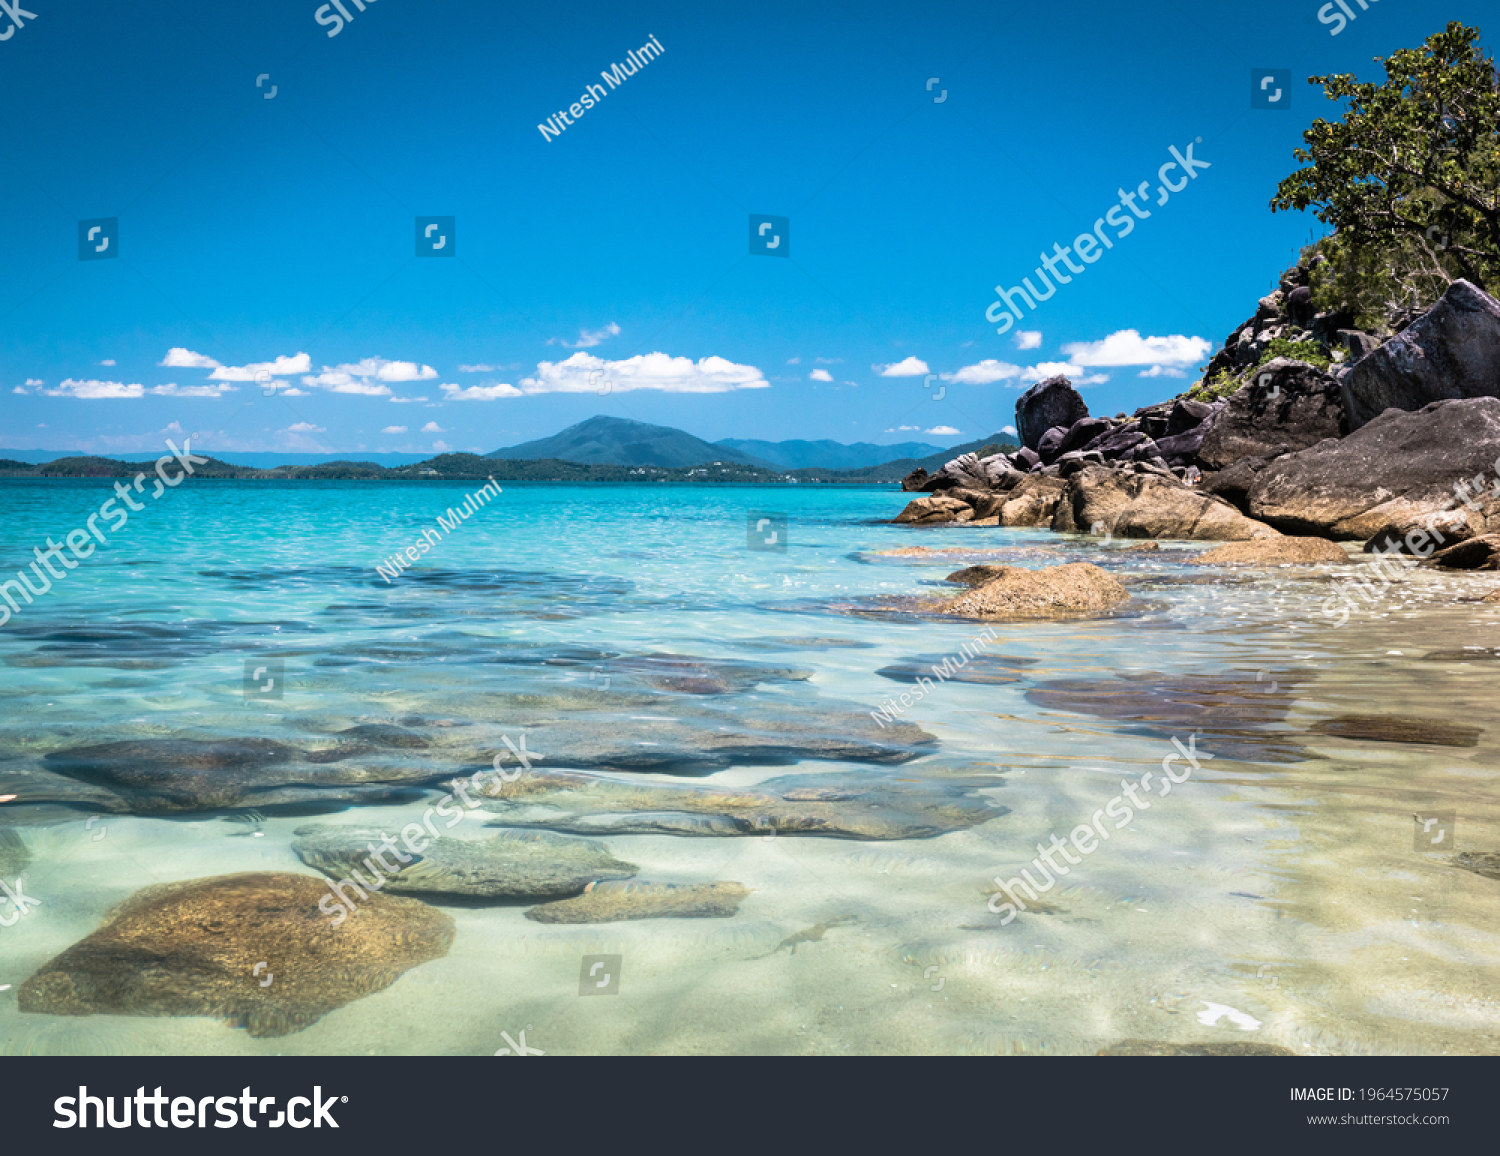 2,845 Mission island Images, Stock Photos & Vectors | Shutterstock